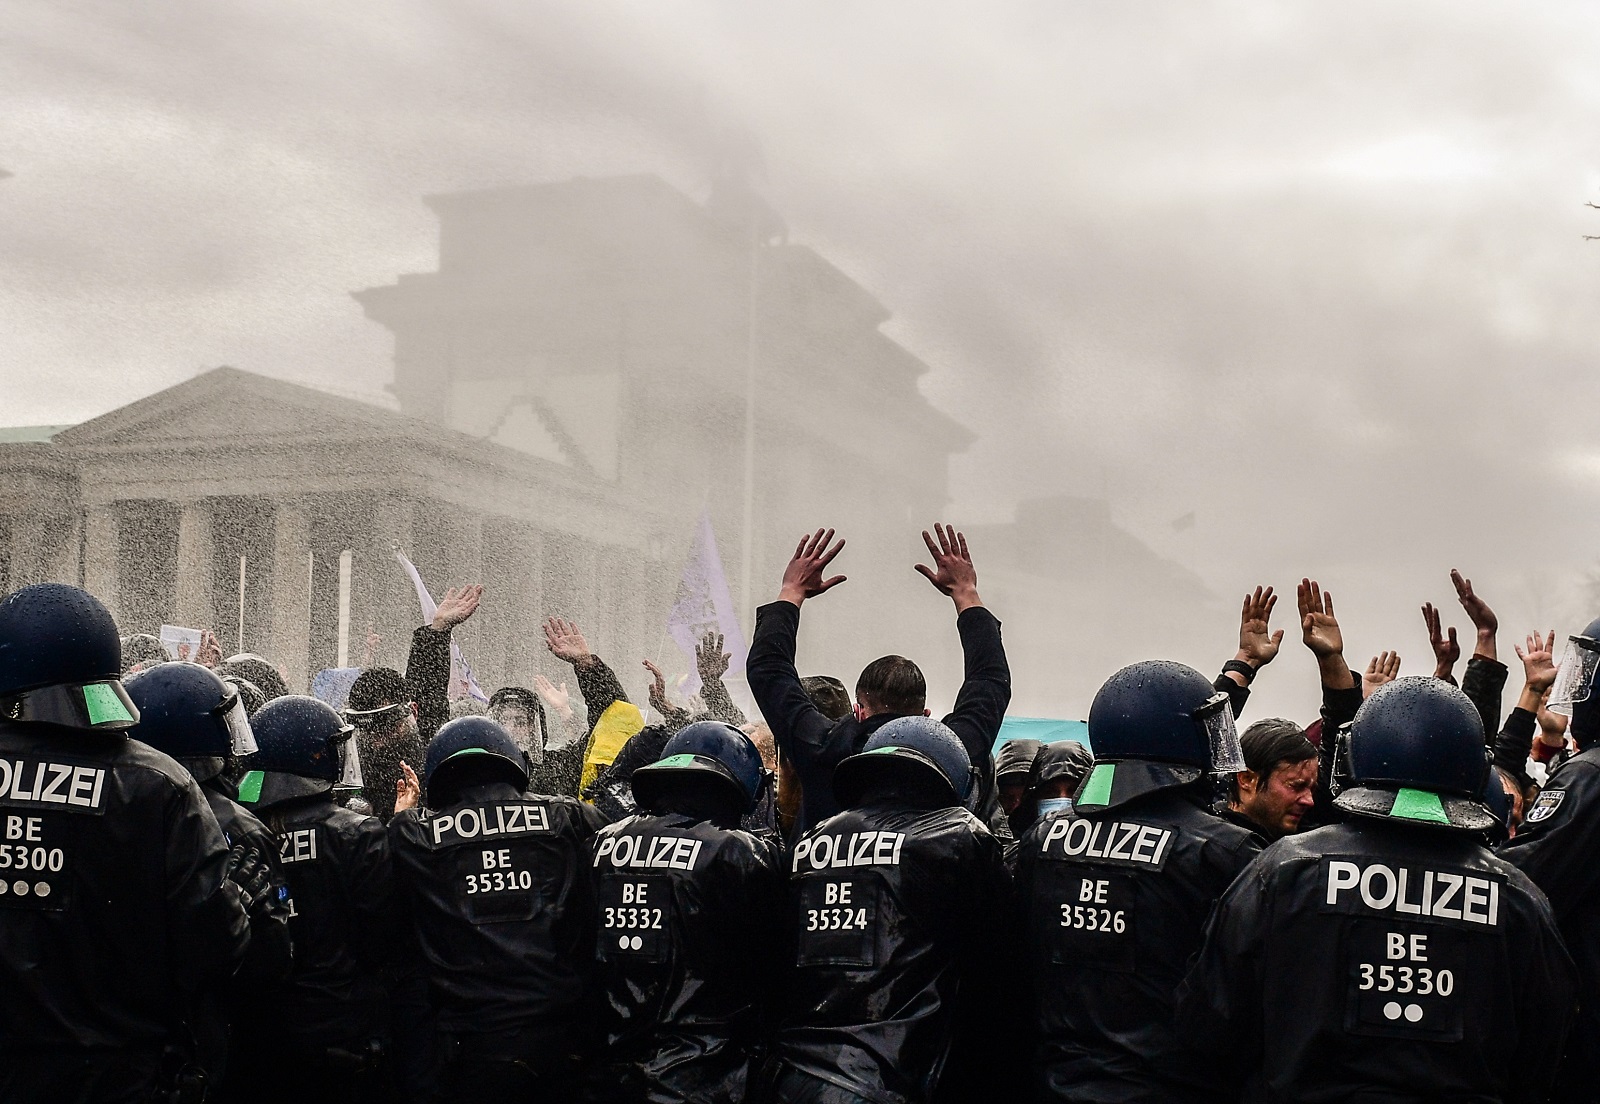 epa08827865 Riot police uses a water cannon to break up a demonstration against German coronavirus restrictions, near the Brandenburg Gate in Berlin, Germany, 18 November 2020. While German interior minister prohibited demonstrations around the Reichstag building during the parliamentary Bundestag session, people gathered to protest against government-imposed semi-lockdown measures aimed at curbing the spread of the coronavirus pandemic. Since 02 November, all restaurants, bars, cultural venues, fitness studious, cinemas and sports halls are forced to close for four weeks as a lockdown measure to rein in skyrocketing coronavirus infection rates.  EPA/FILIP SINGER